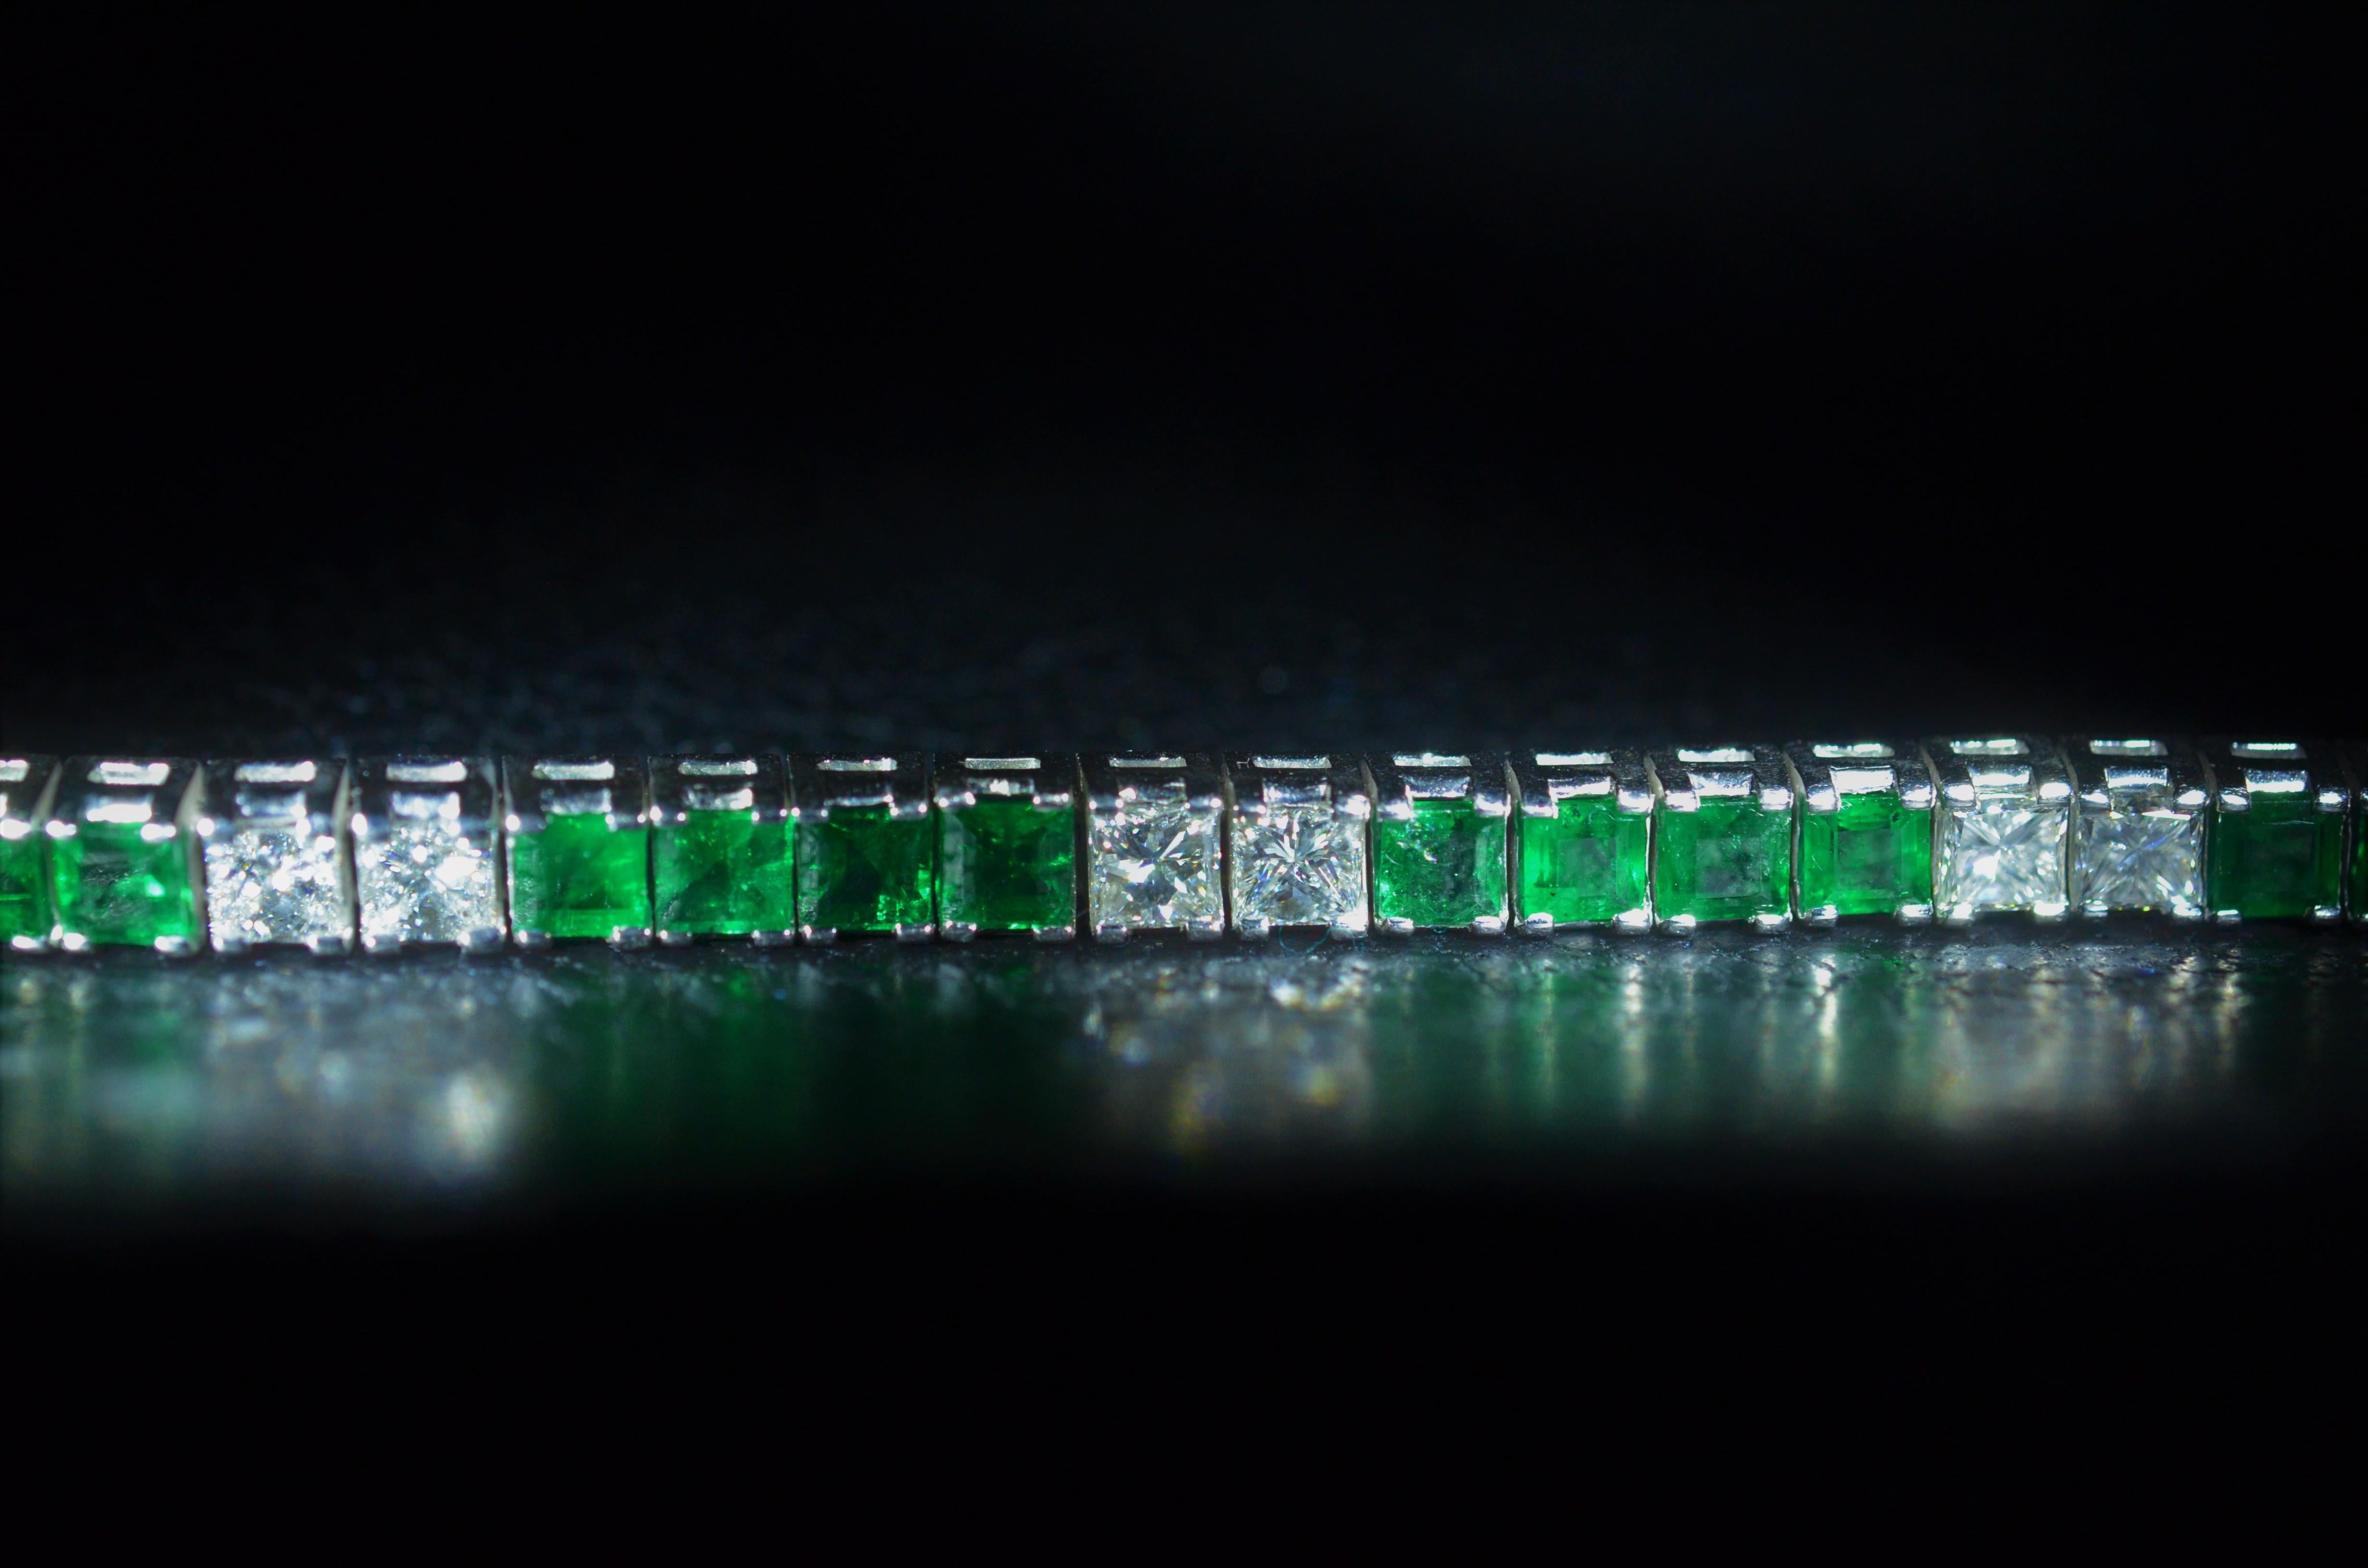 Exquisite ladies platinum line bracelet set with alternating sections of vivid bluish-Green emeralds and diamonds. The estimated total diamond weight by measurement is 7.20 carats. The estimated emerald weight by measurement is 9.80 carats. The